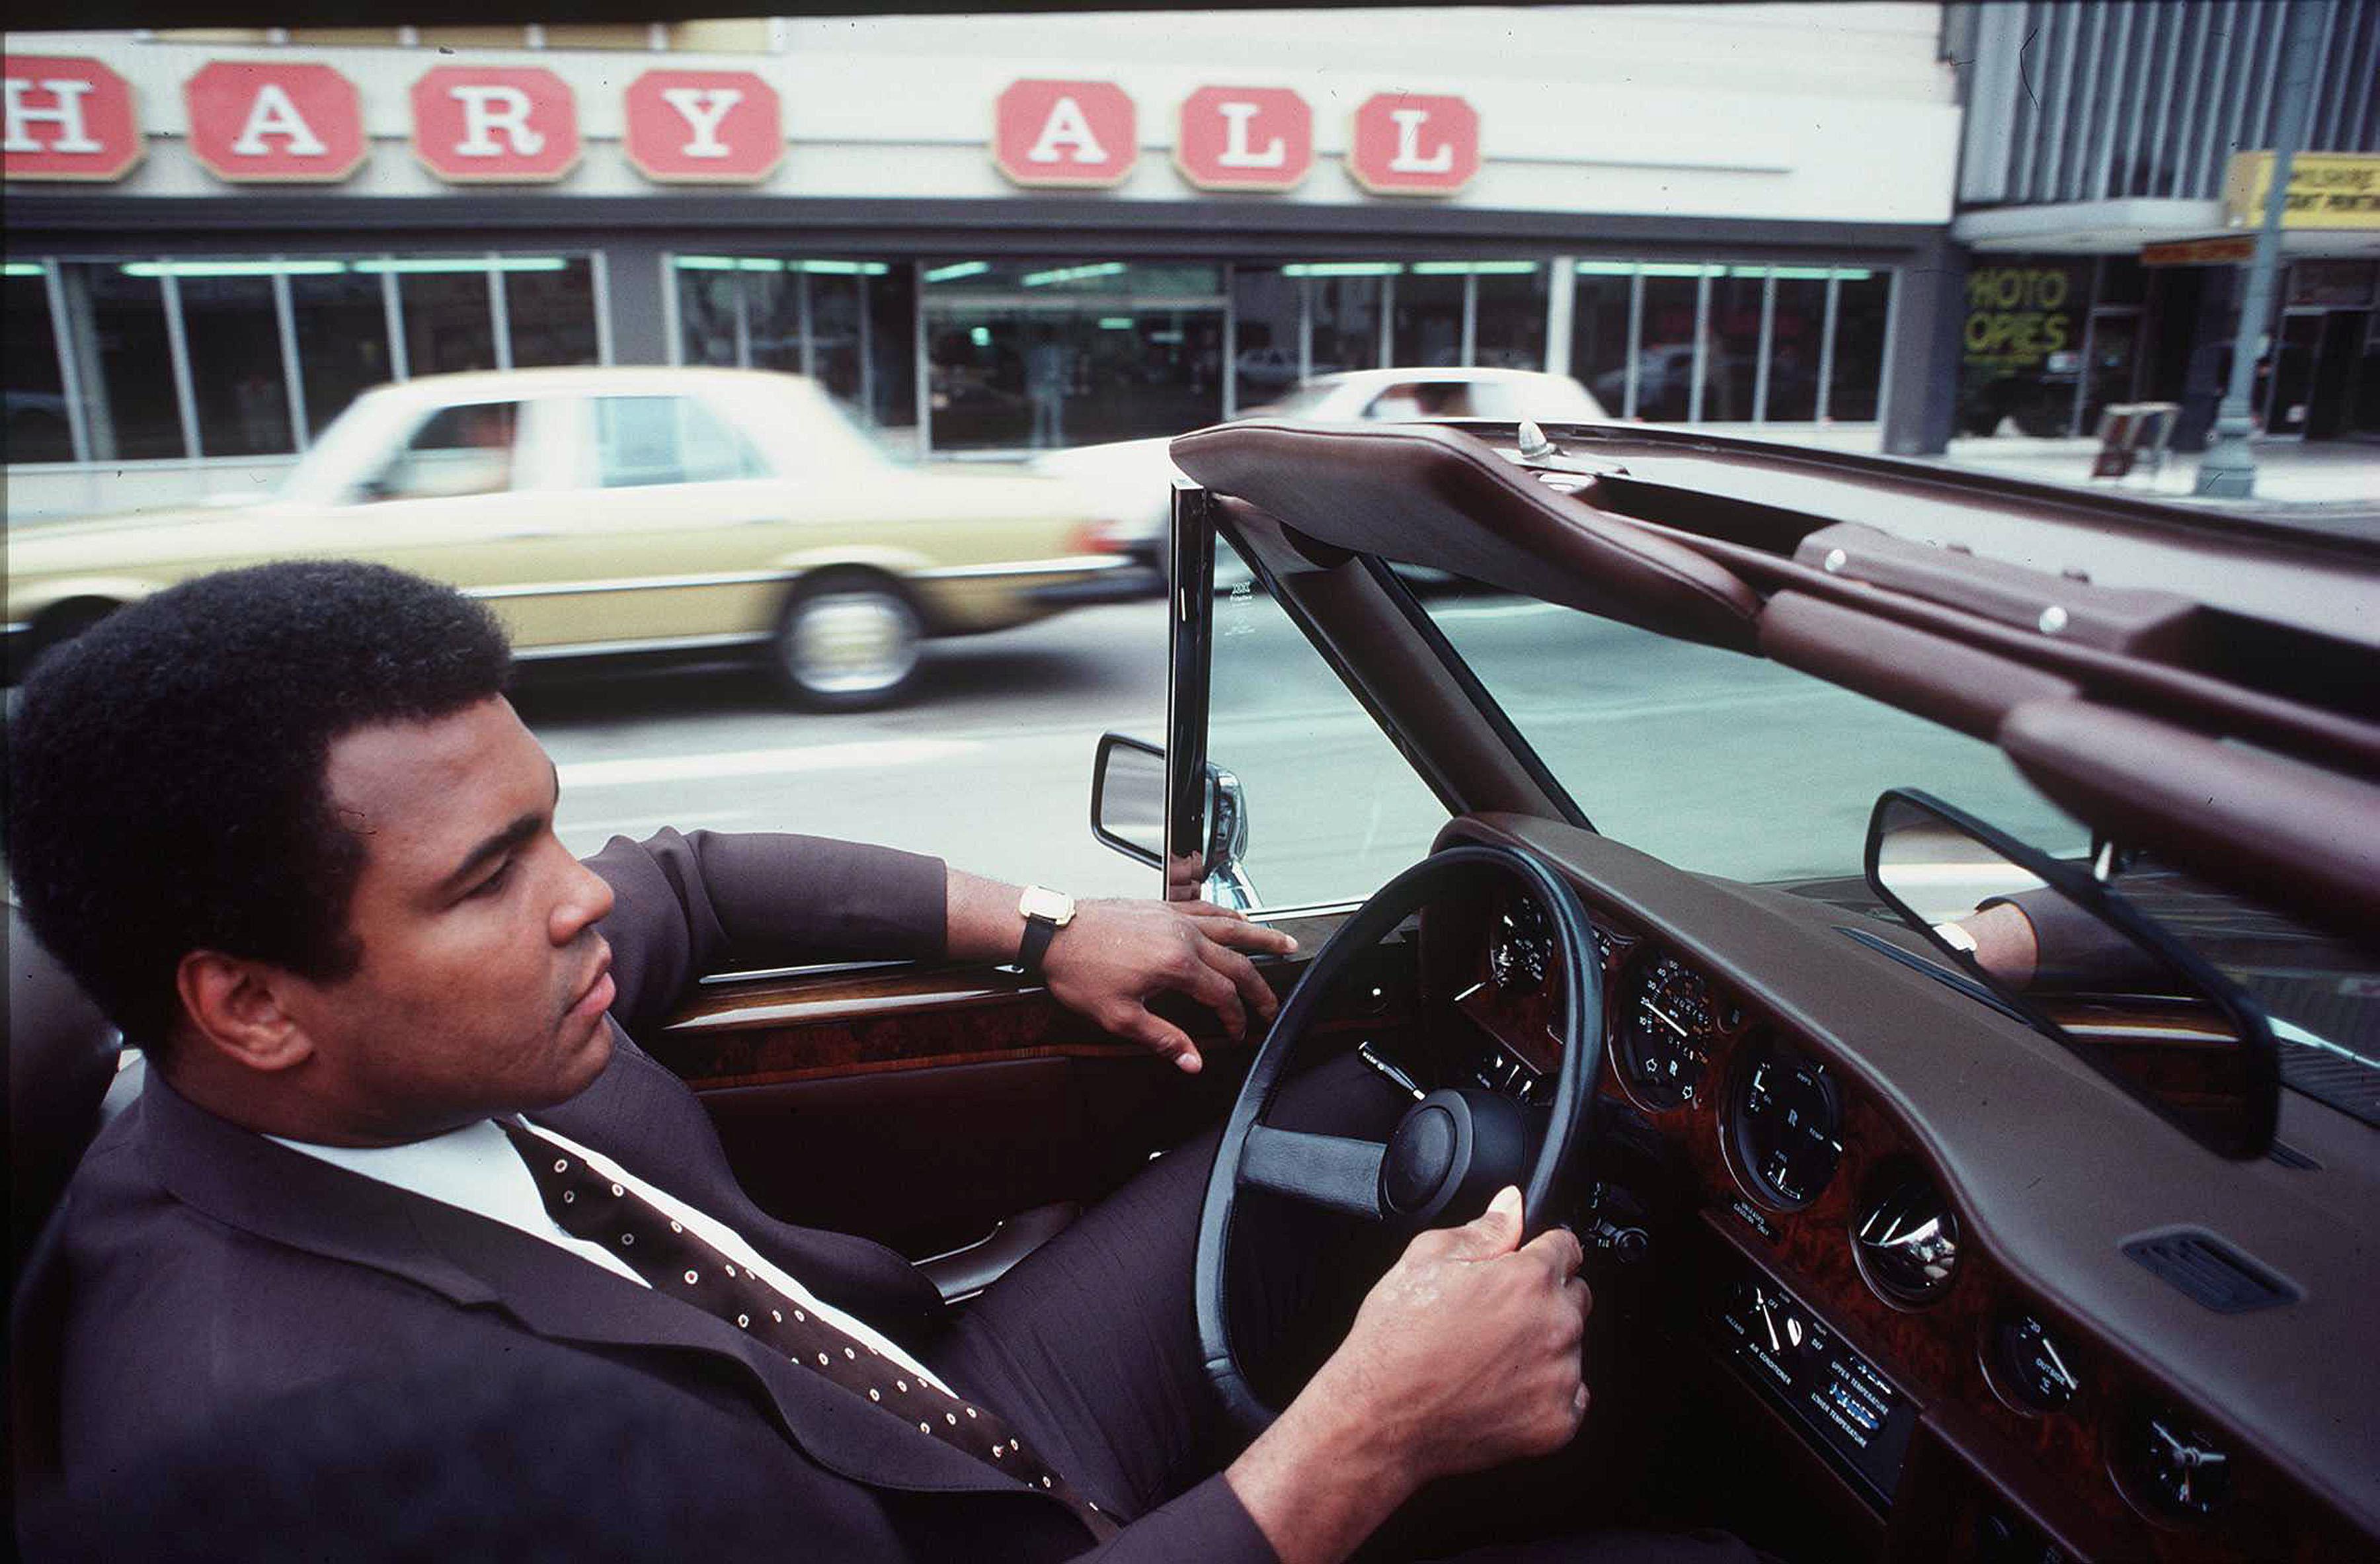 3113 LOS ANGELES CALIFORNIA May 3, 1980 Muhammad Ali drives his convertible Rolls Royce through the streets of Los Angeles before his last fight with Larry Holmes which took place in Las Vegas, 2nd October 1980., Image: 288875227, License: Rights-managed, Restrictions: , Model Release: no, Credit line: Profimedia, Pacific coast news